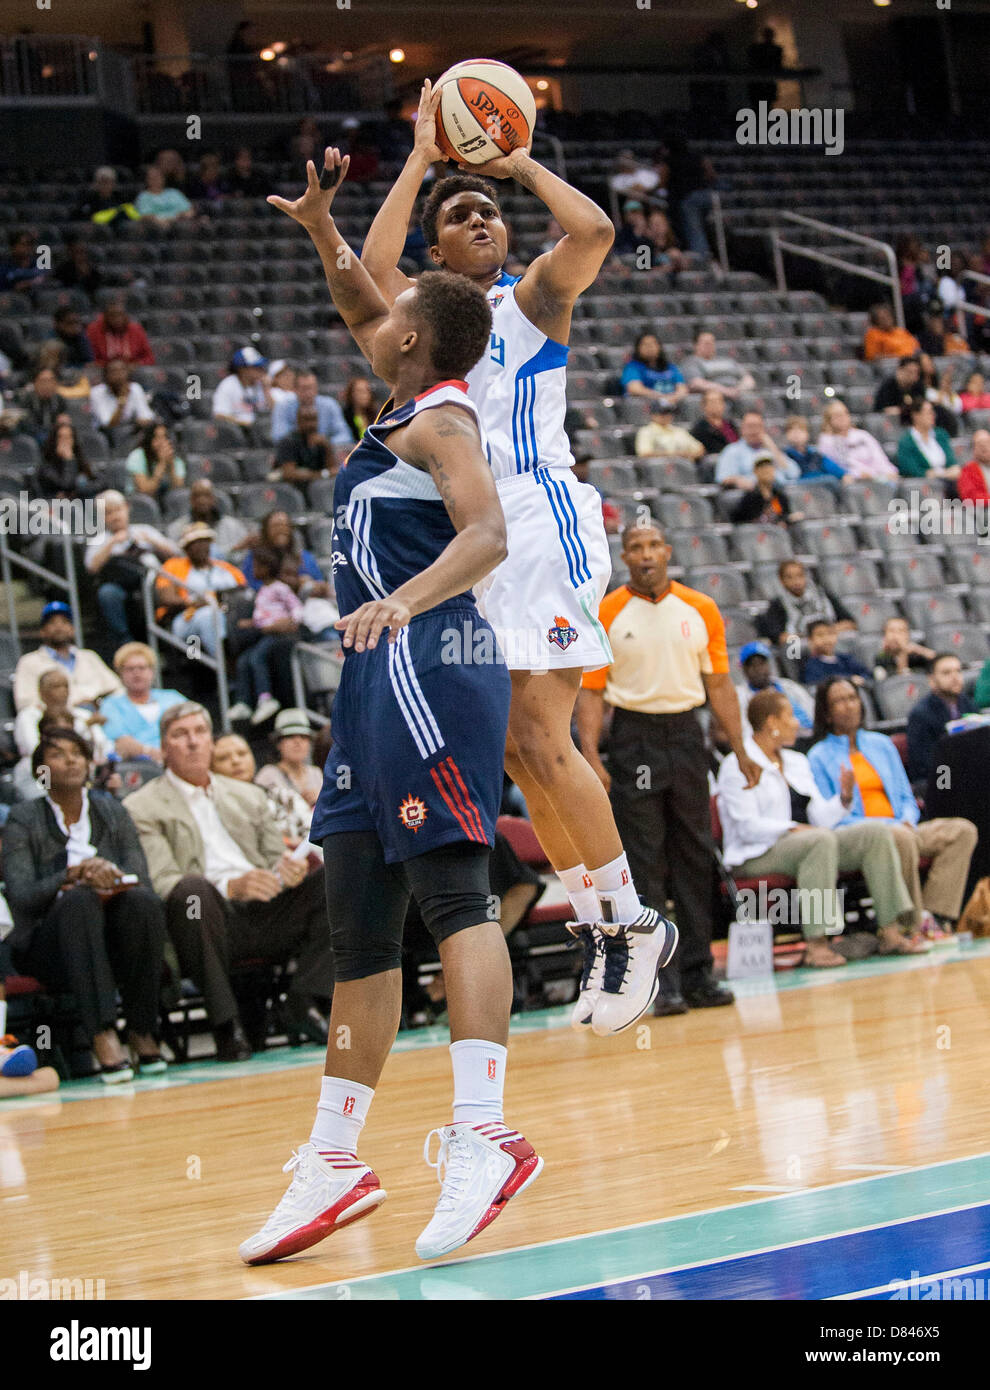 May 18, 2013 - Newark, New Jersey, U.S. - Liberty guard Kamiko Williams #4 shoots over Sun's guard Natasha Lacy #11 in the first half during WNBA action at the Prudential Center in Newark NJ. New York Liberty defeated the Connecticut Sun 78-67. Stock Photo